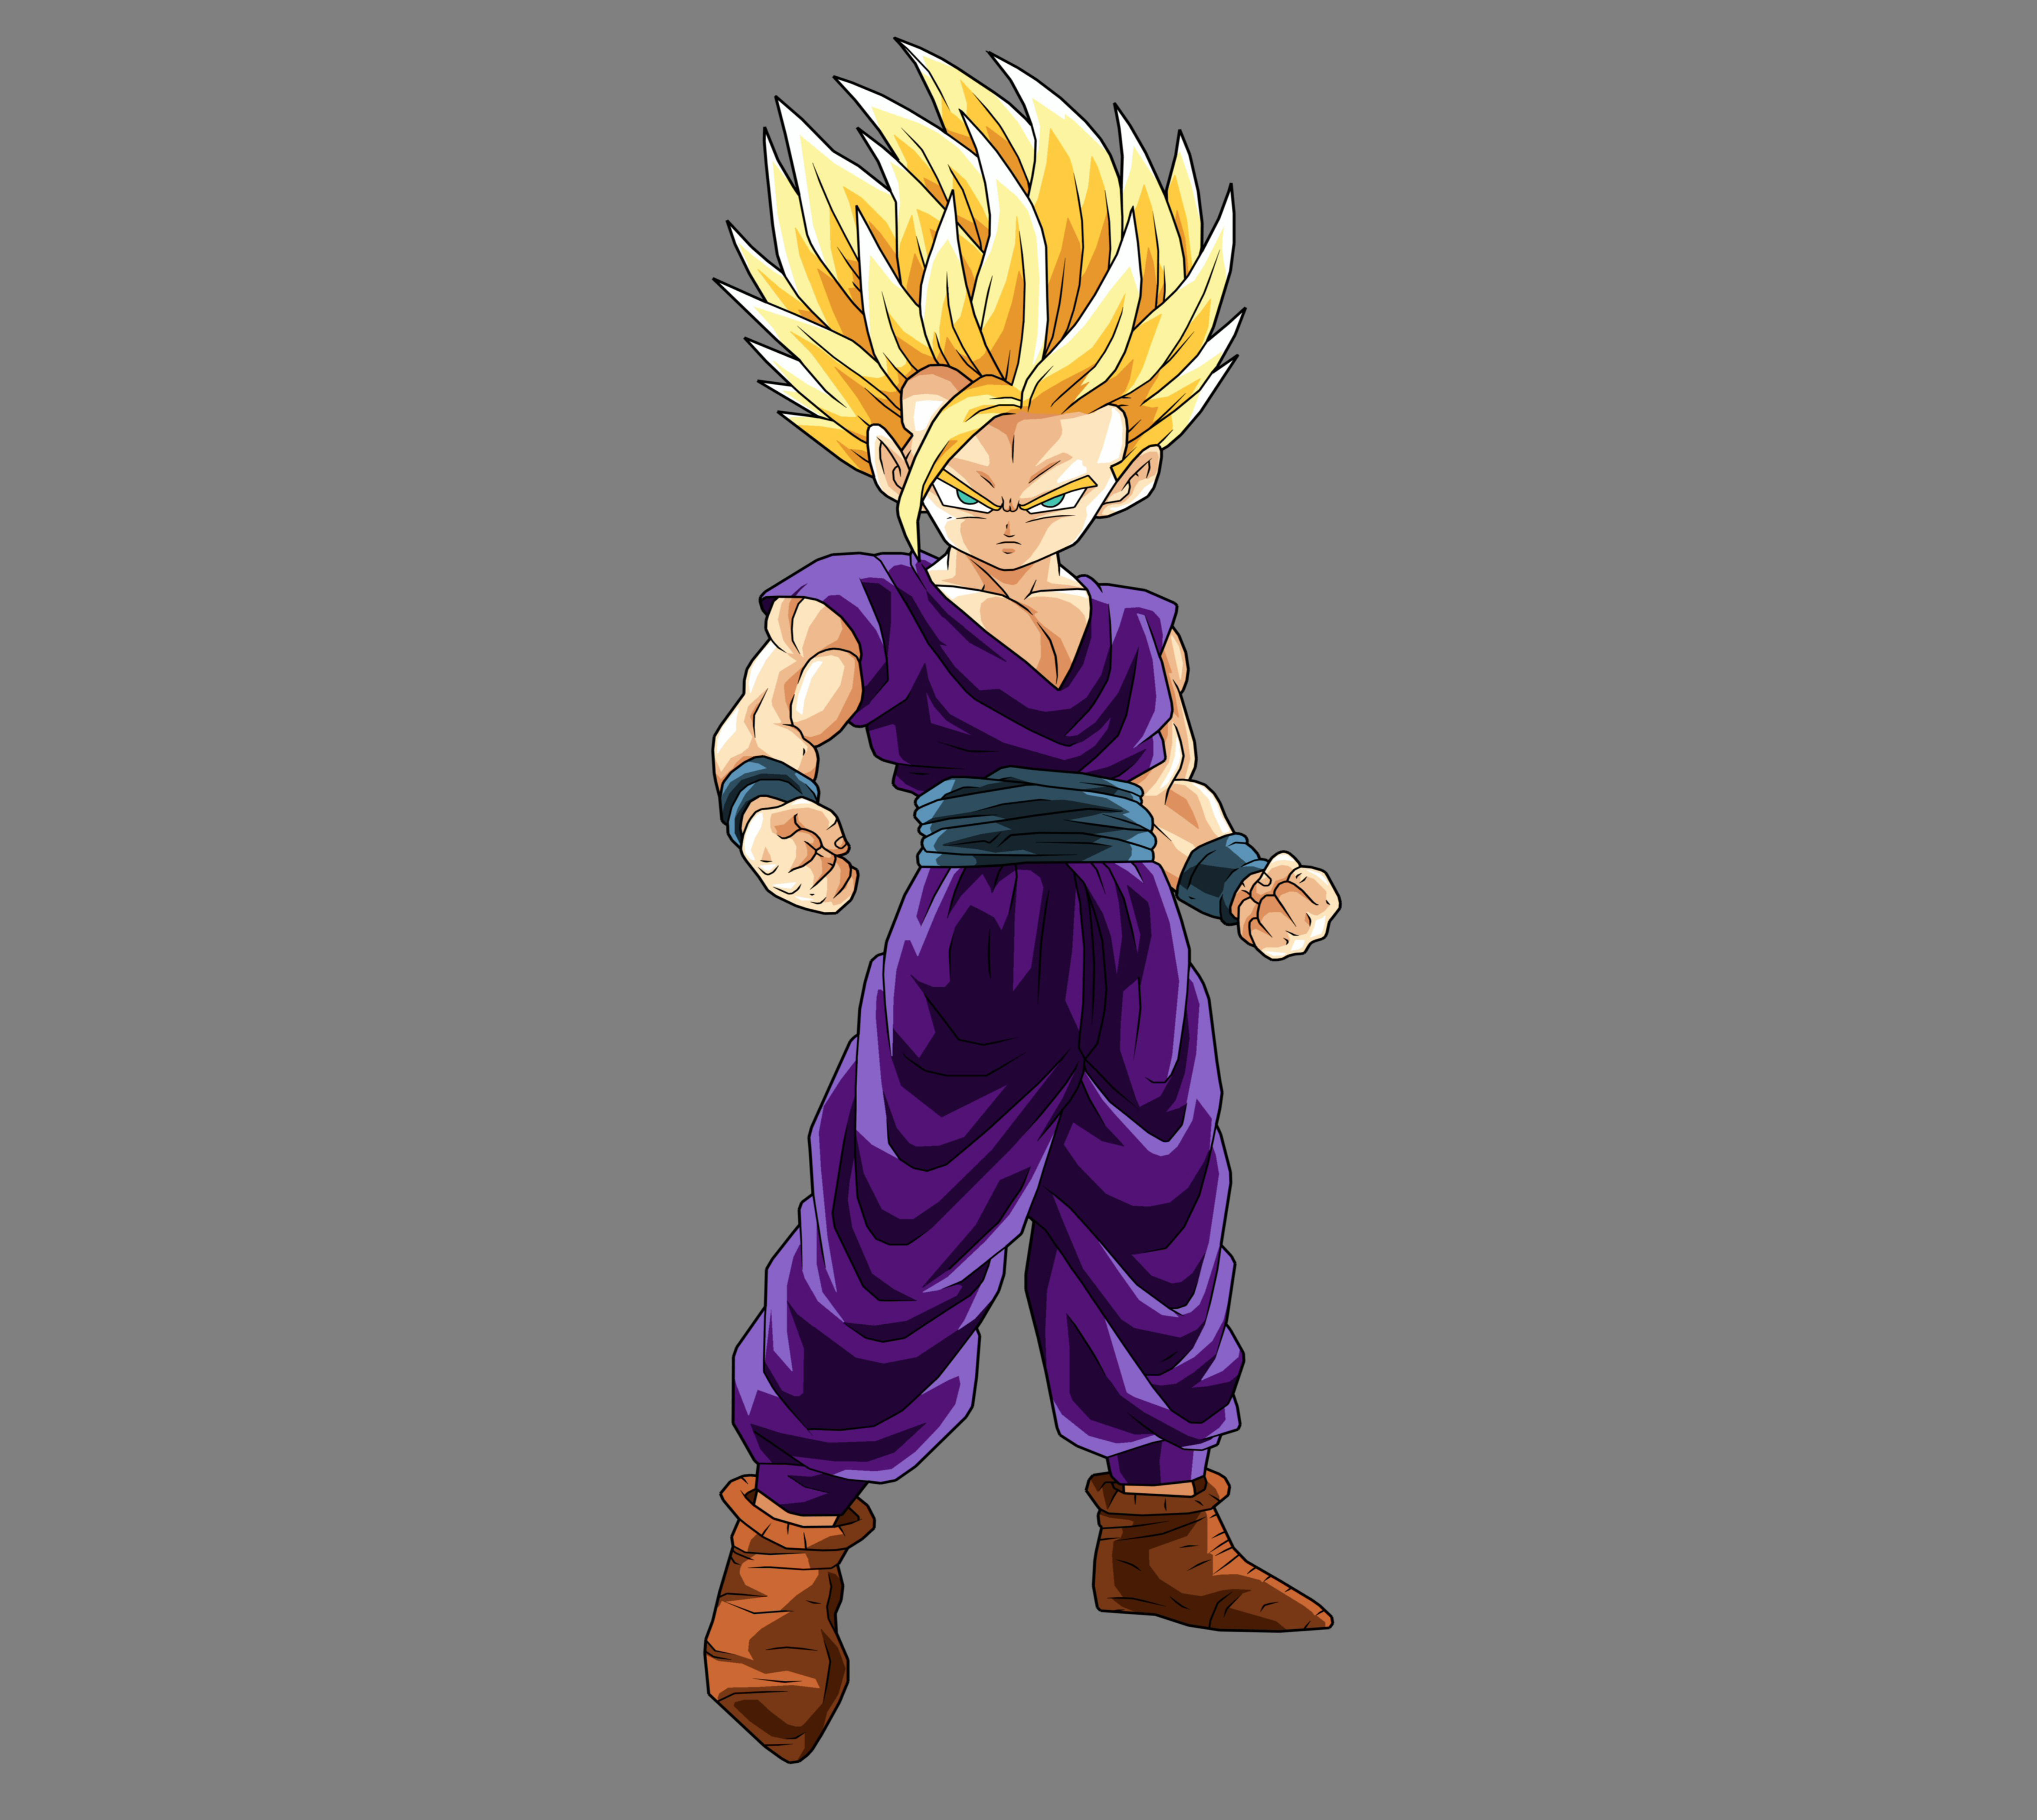 2560x1080 Dragon Ball Z Gohan Art 2560x1080 Resolution Wallpaper Hd Anime 4k Wallpapers Images Photos And Background